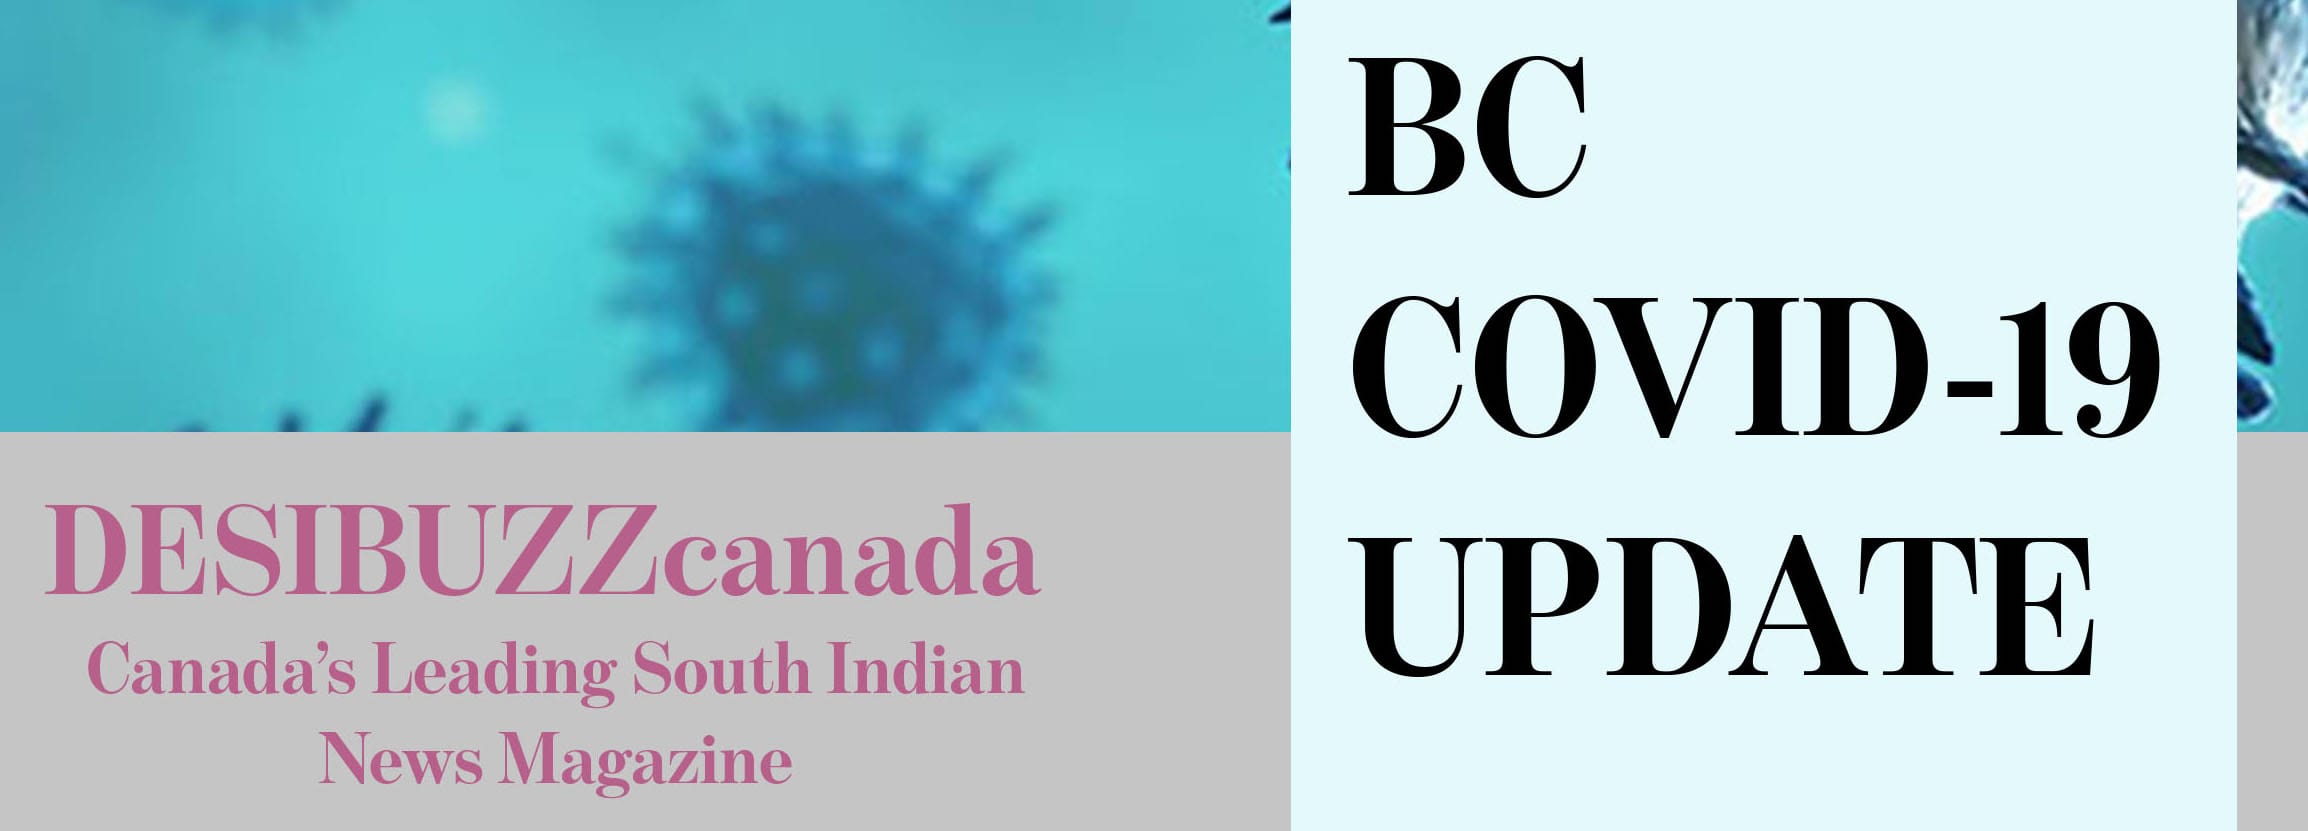 BC COVID-19 DAILY UPDATE: Cases Rise More Than 100 From Wednesday With One New Death